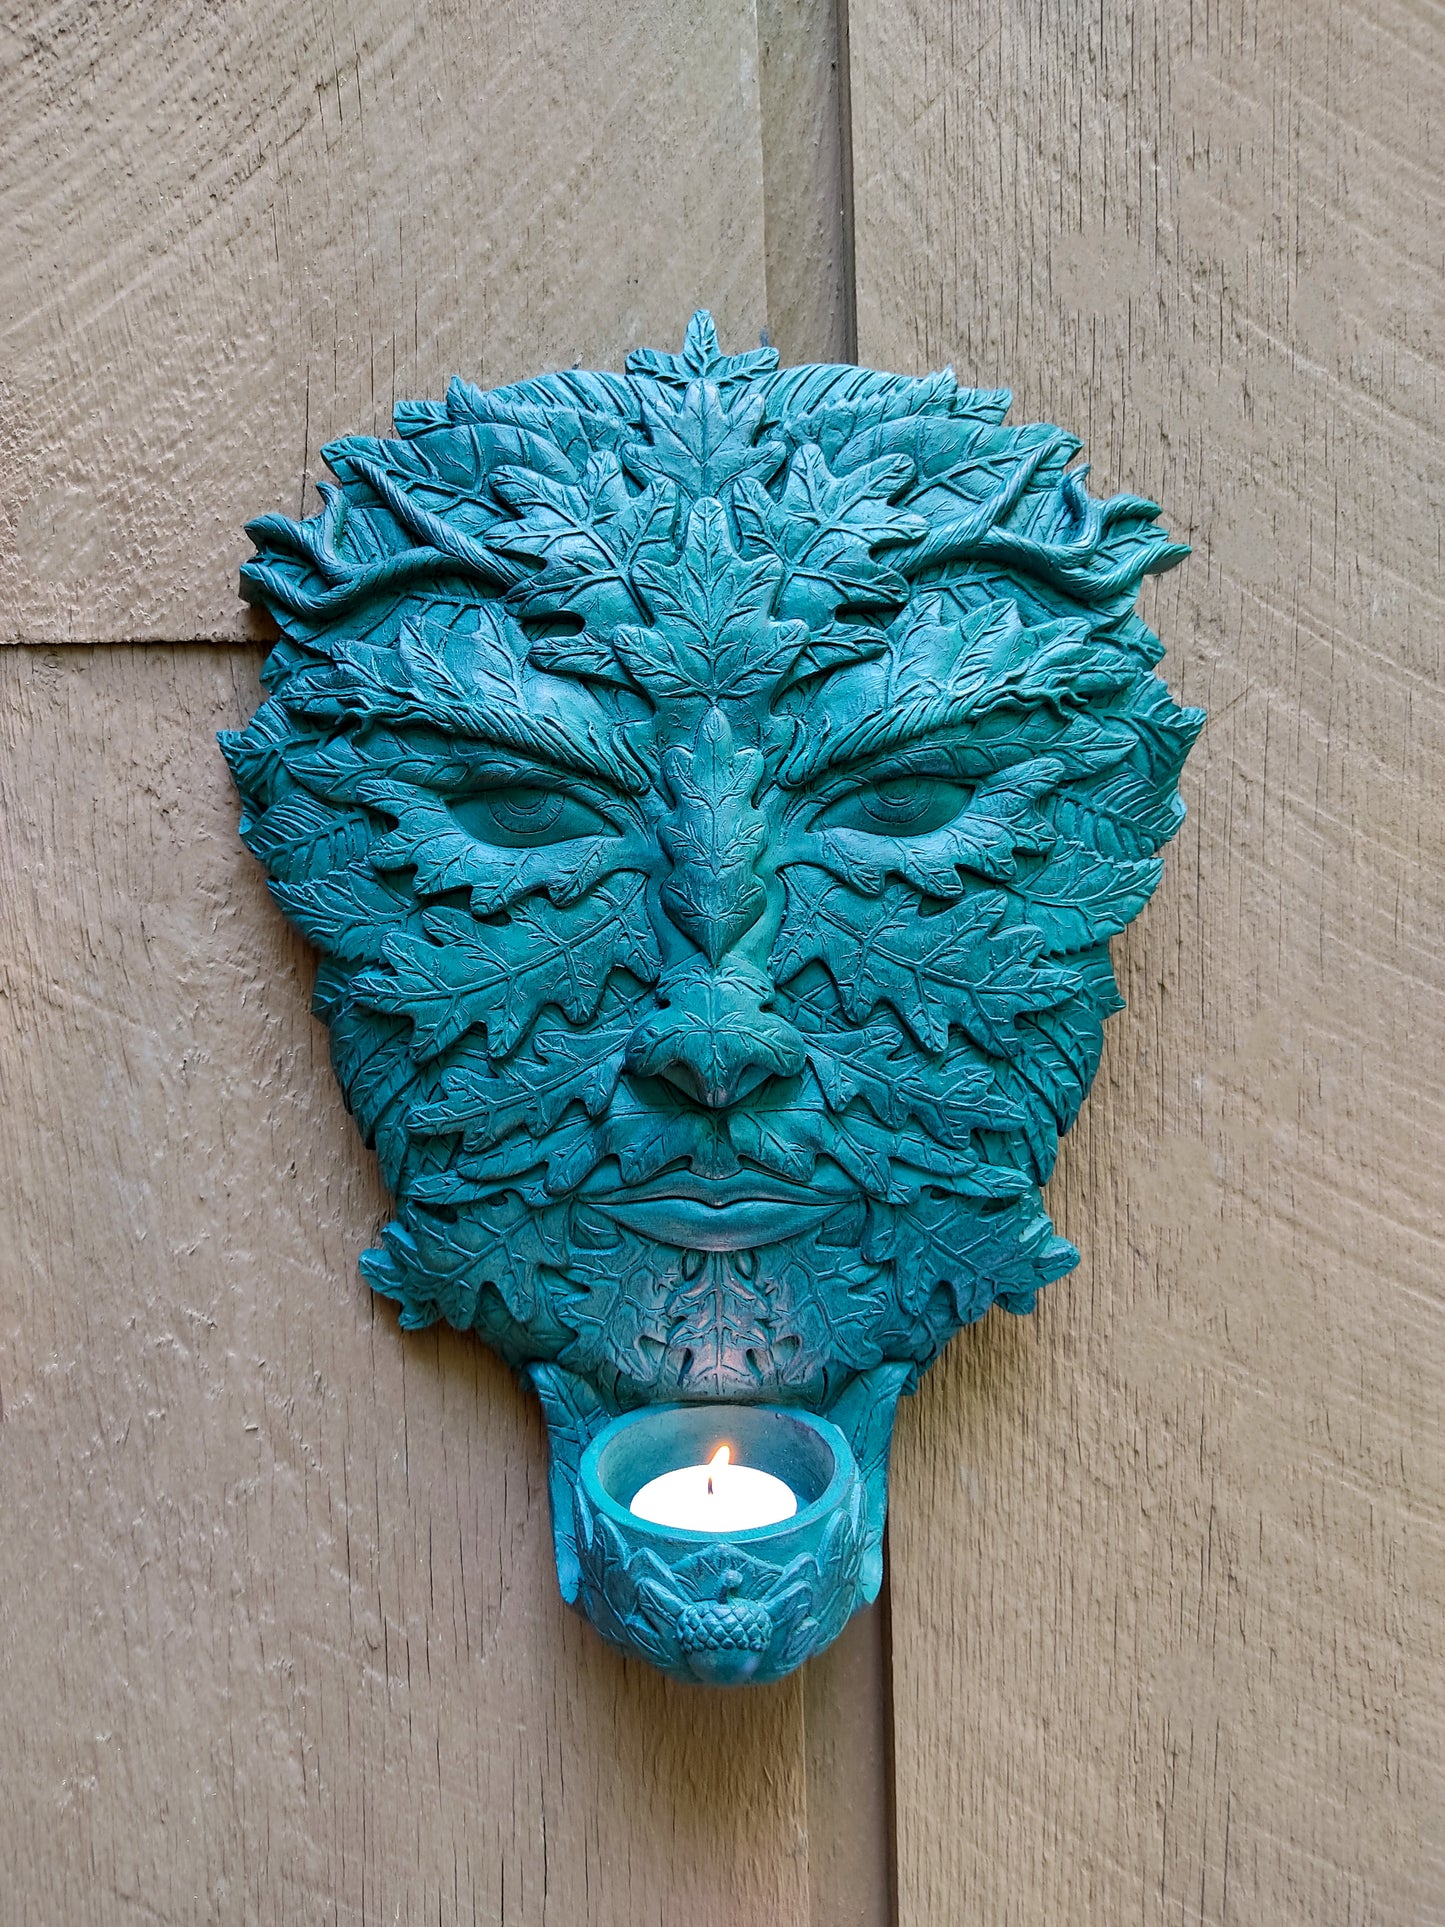 Green Man Wall Plaque | Candle Holder | Offering Bowl | Handmade Unique Decor